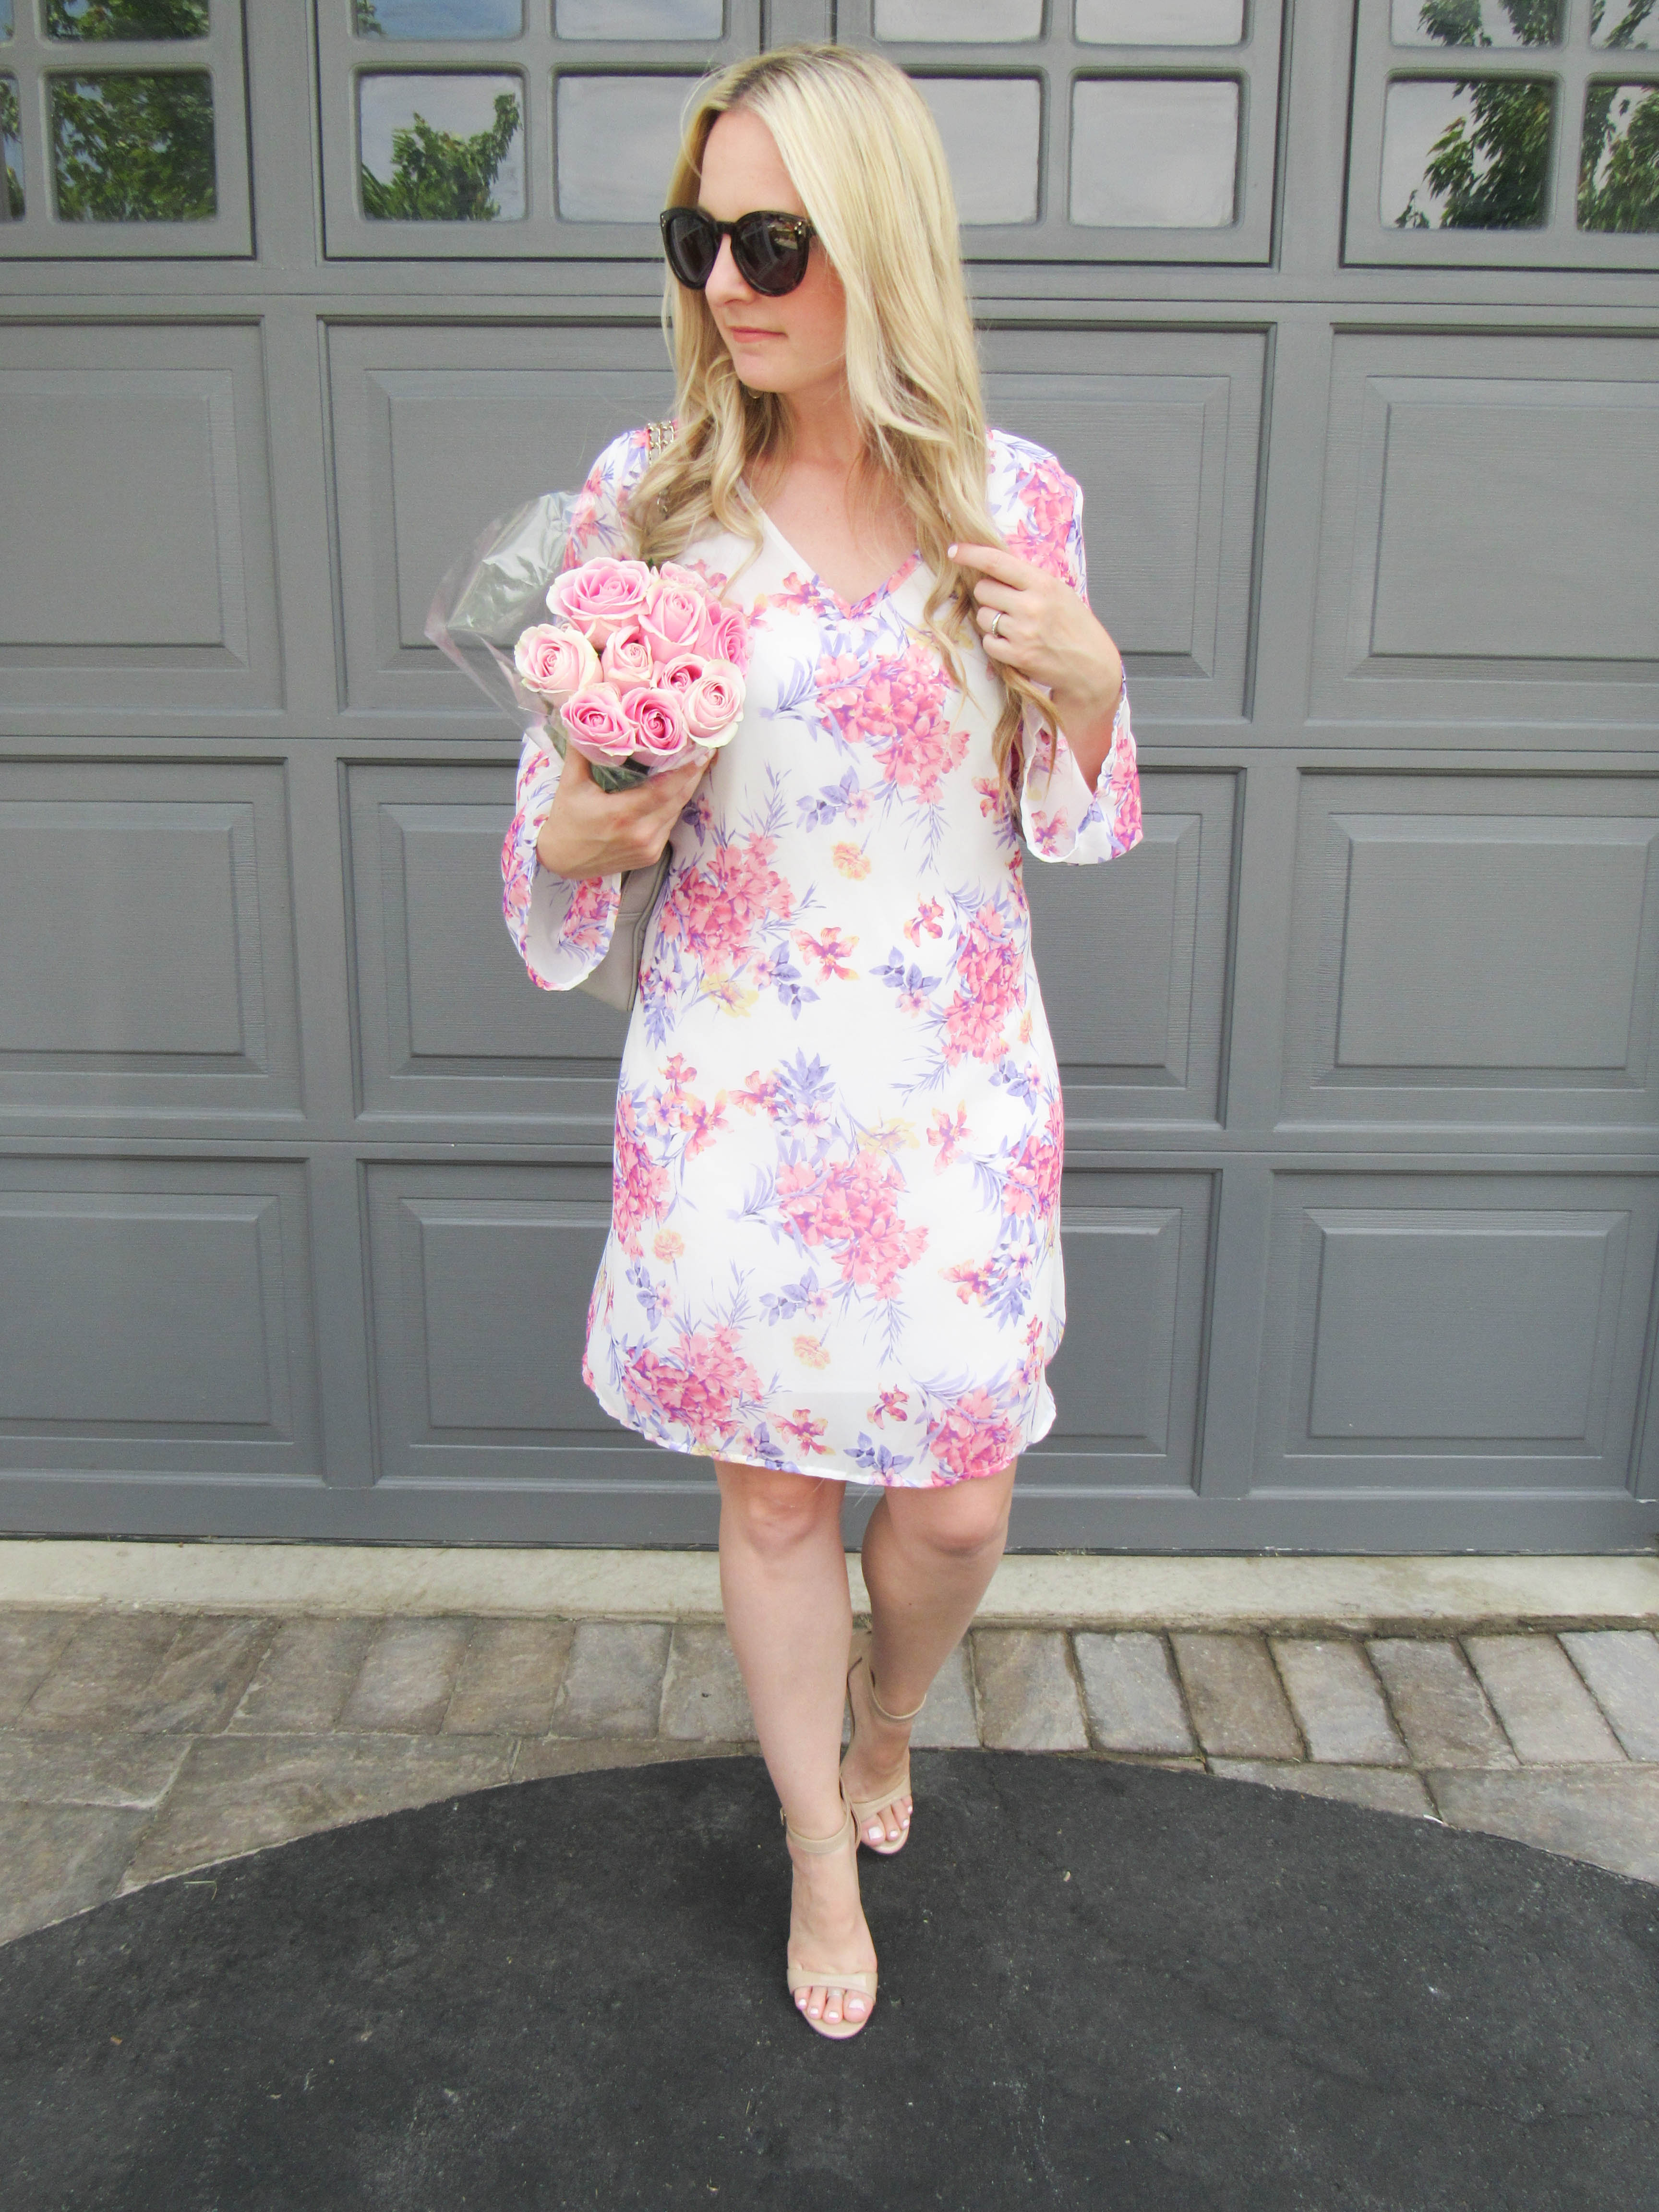 Pink Blush Dress on Livin; Life with Style 